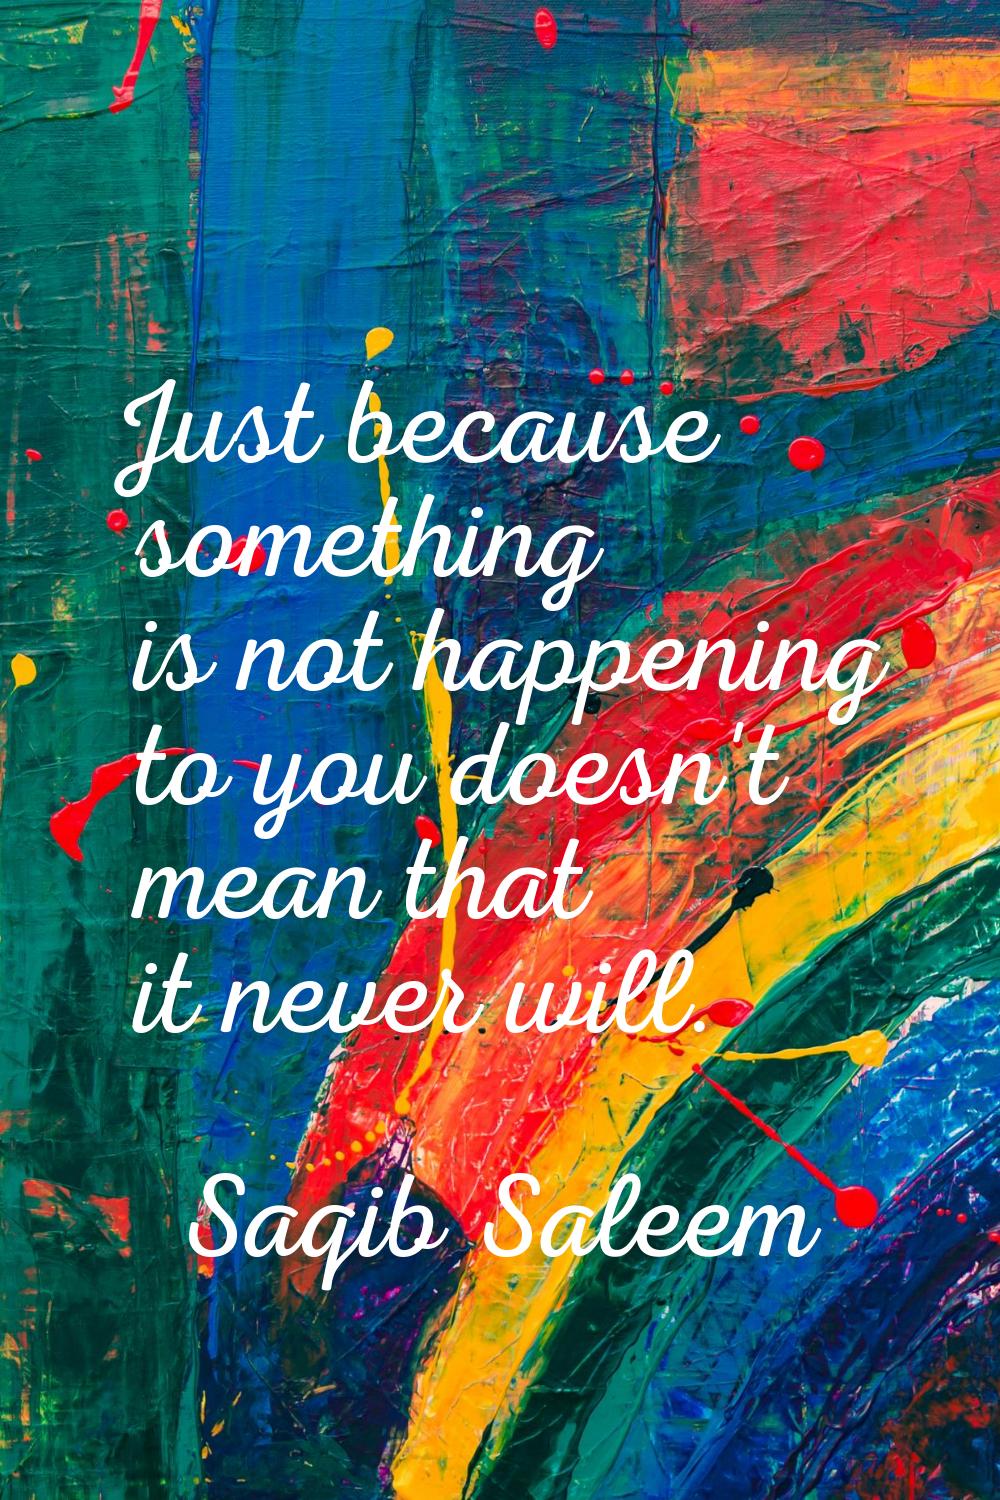 Just because something is not happening to you doesn't mean that it never will.